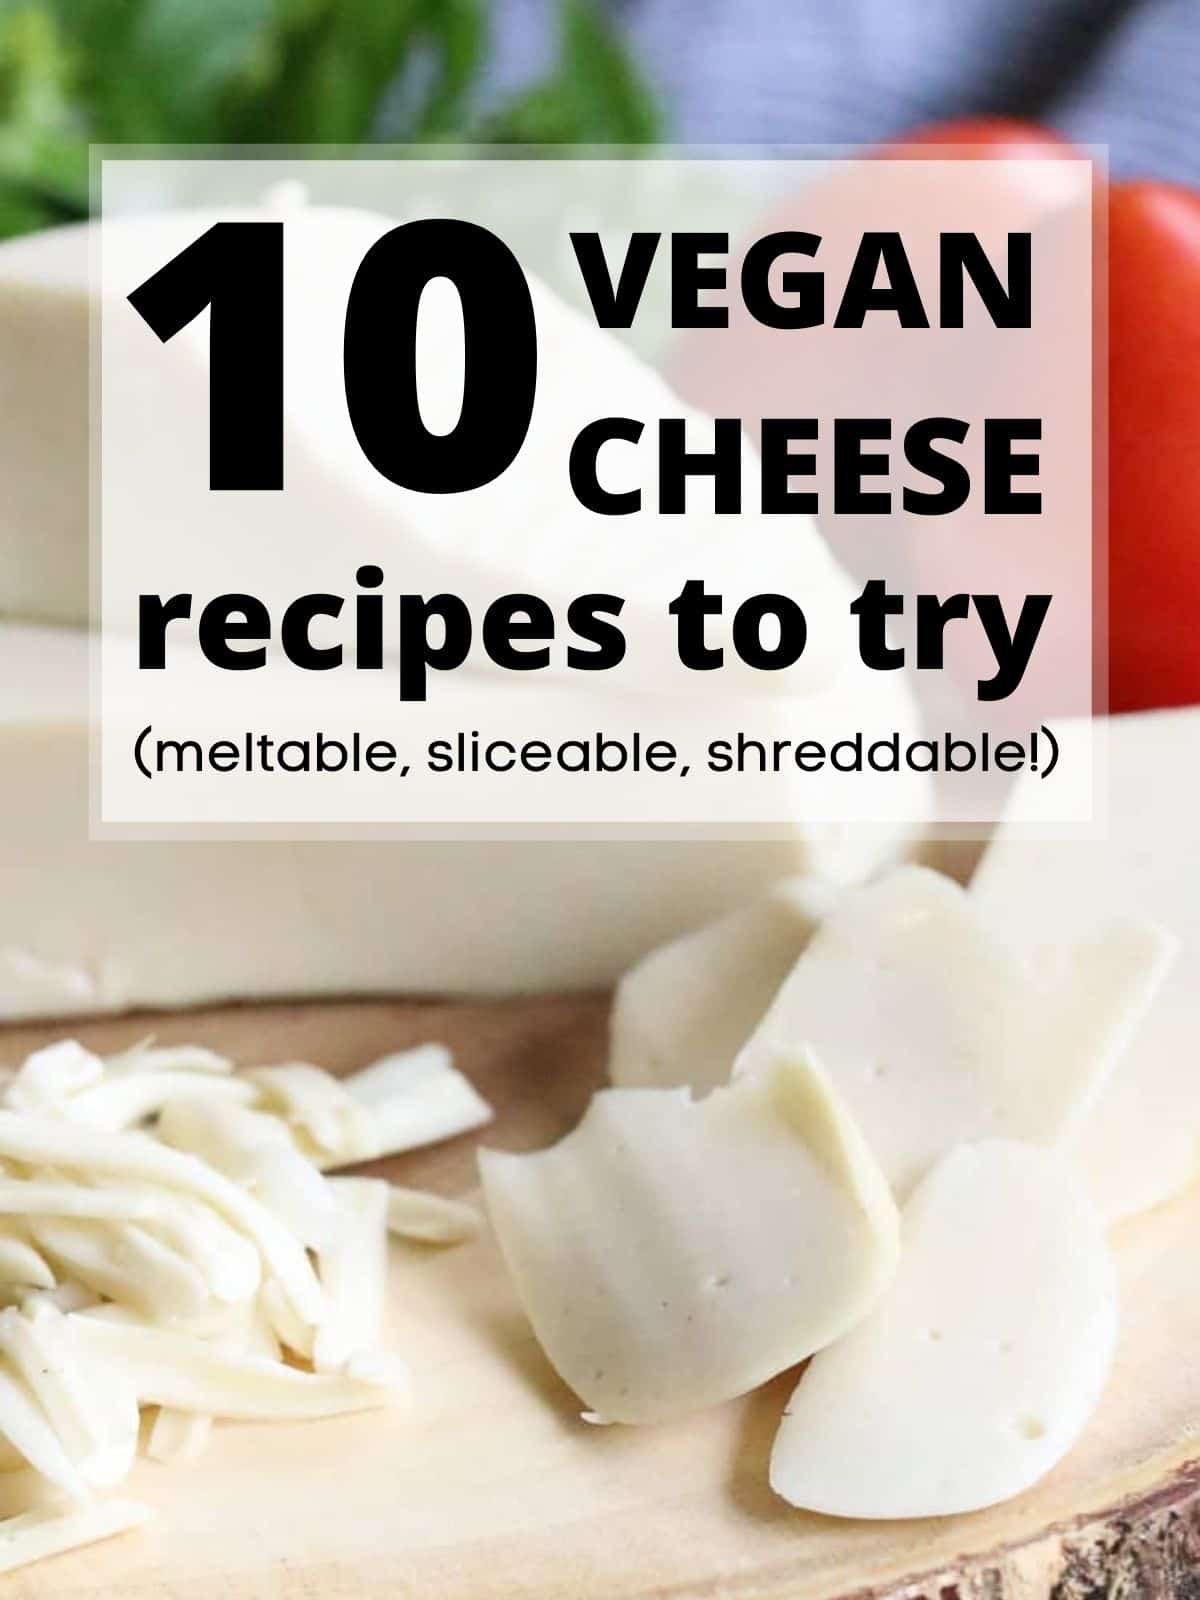 10 Vegan Cheese Recipes You HAVE To Try! - Vegan Blueberry